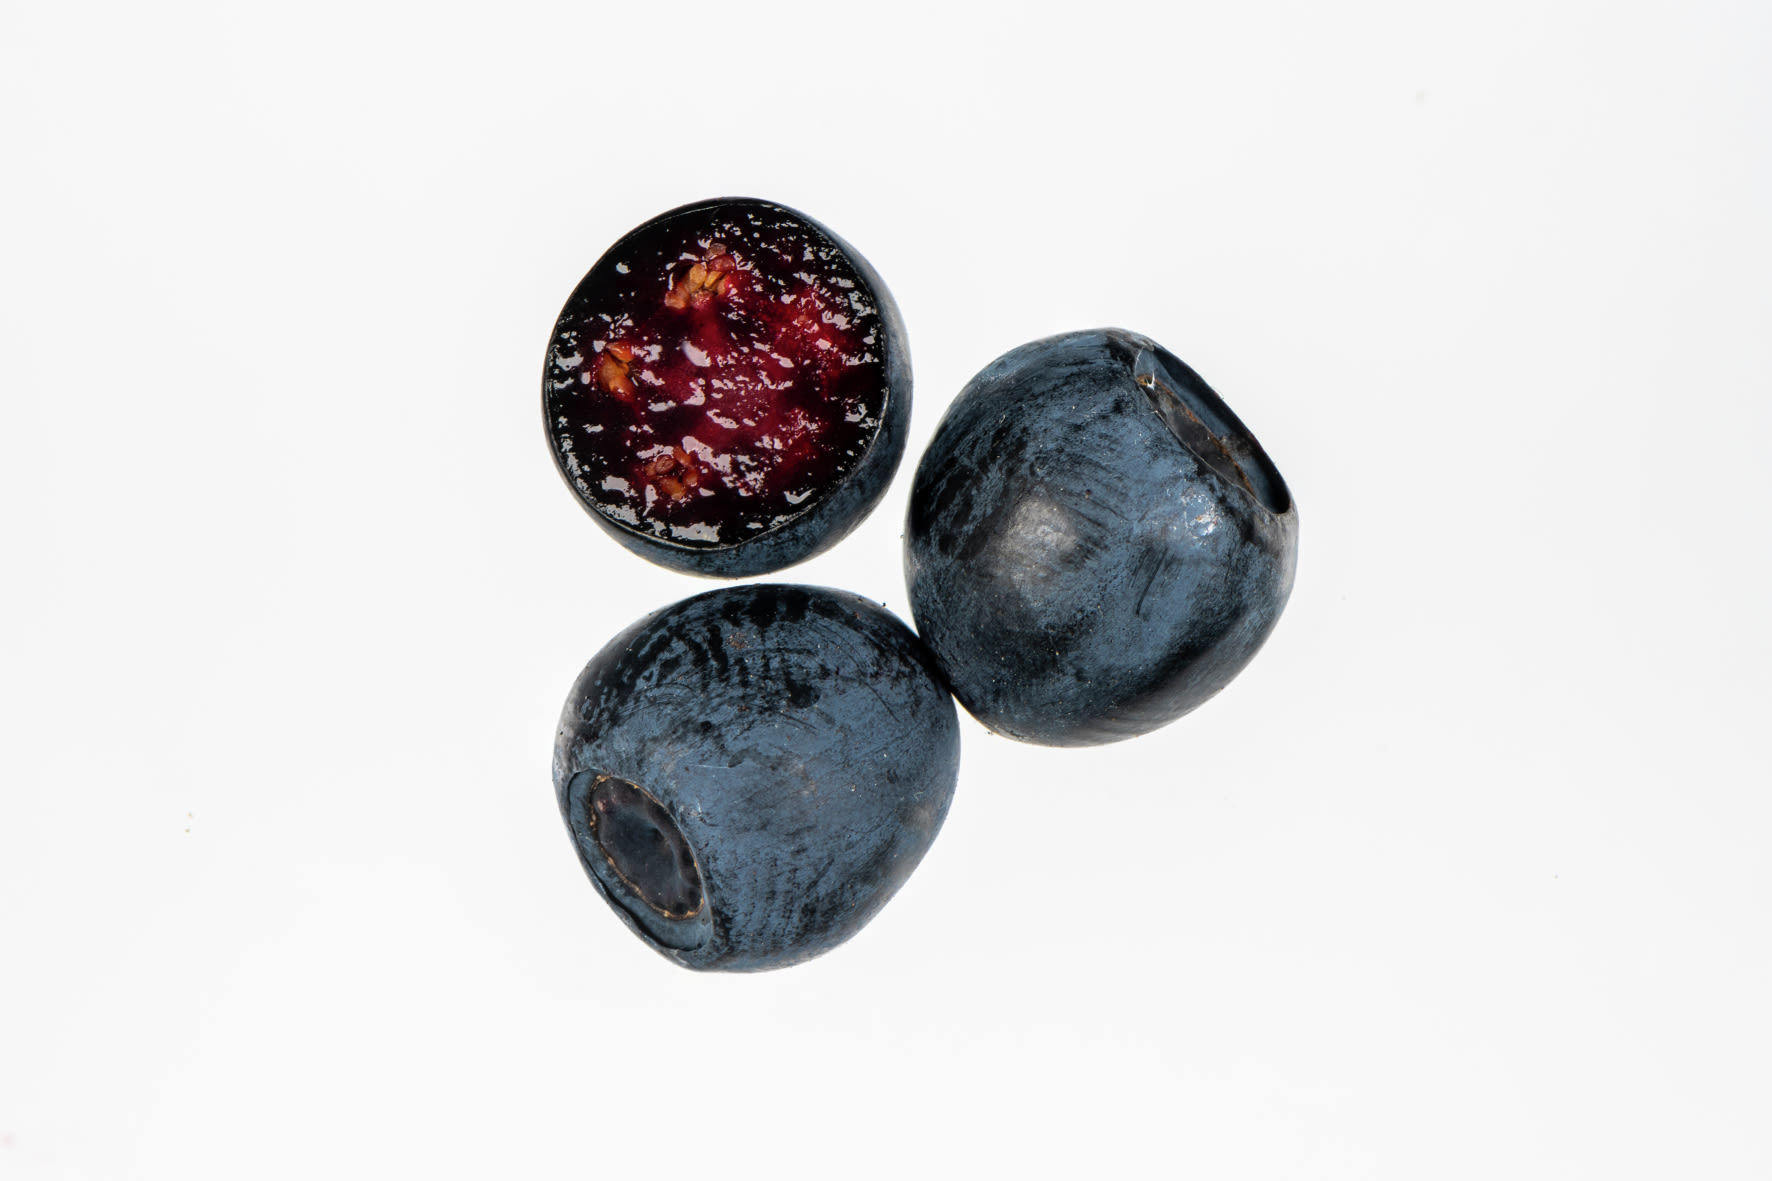 New Zealand researchers lead world-first sequencing of bilberry genome